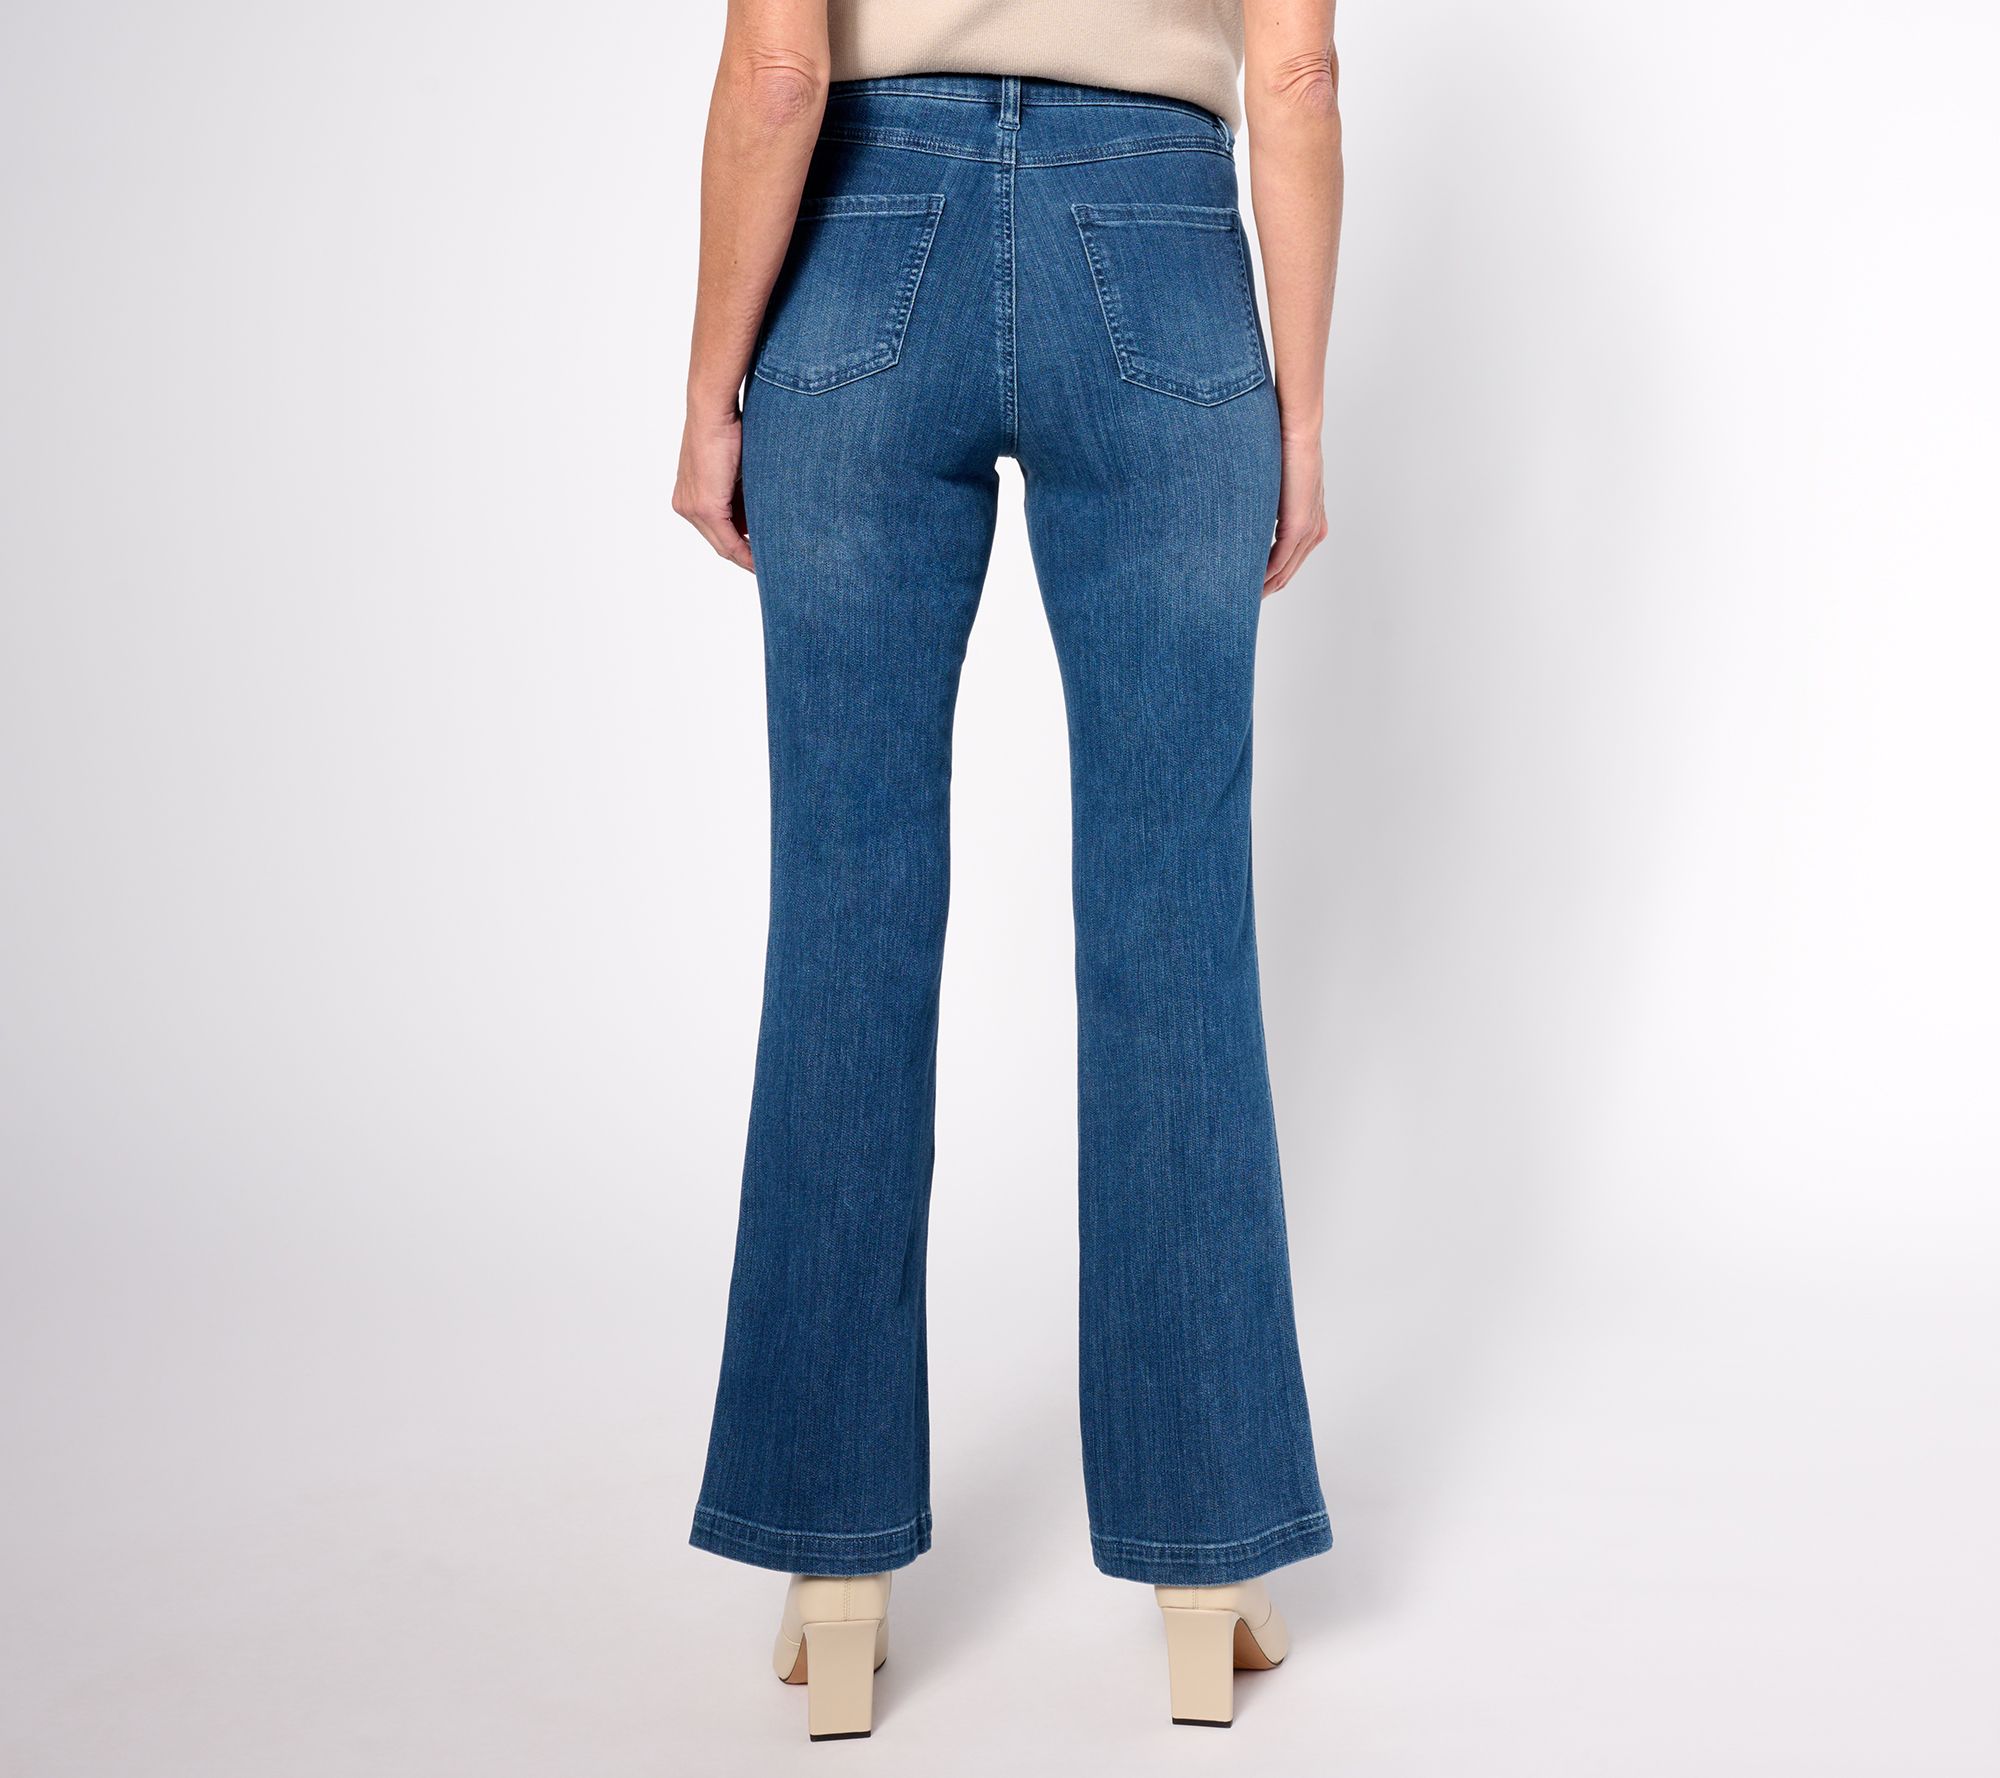 Belle by Kim Gravel Primabelle Tall Patch Pocket Flare Jean